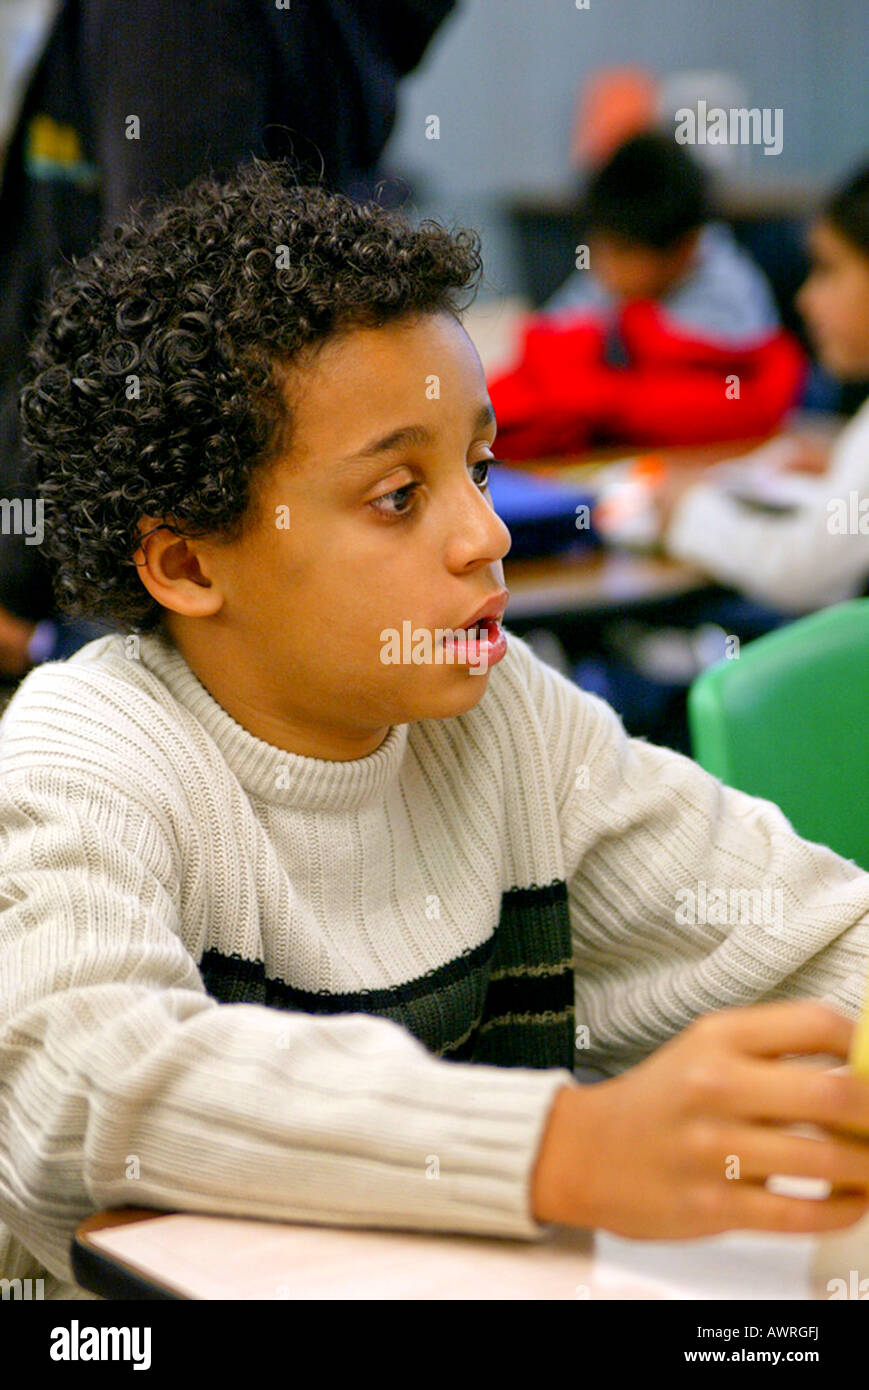 Black boy watches other children at table at recreation center Model released Stock Photo